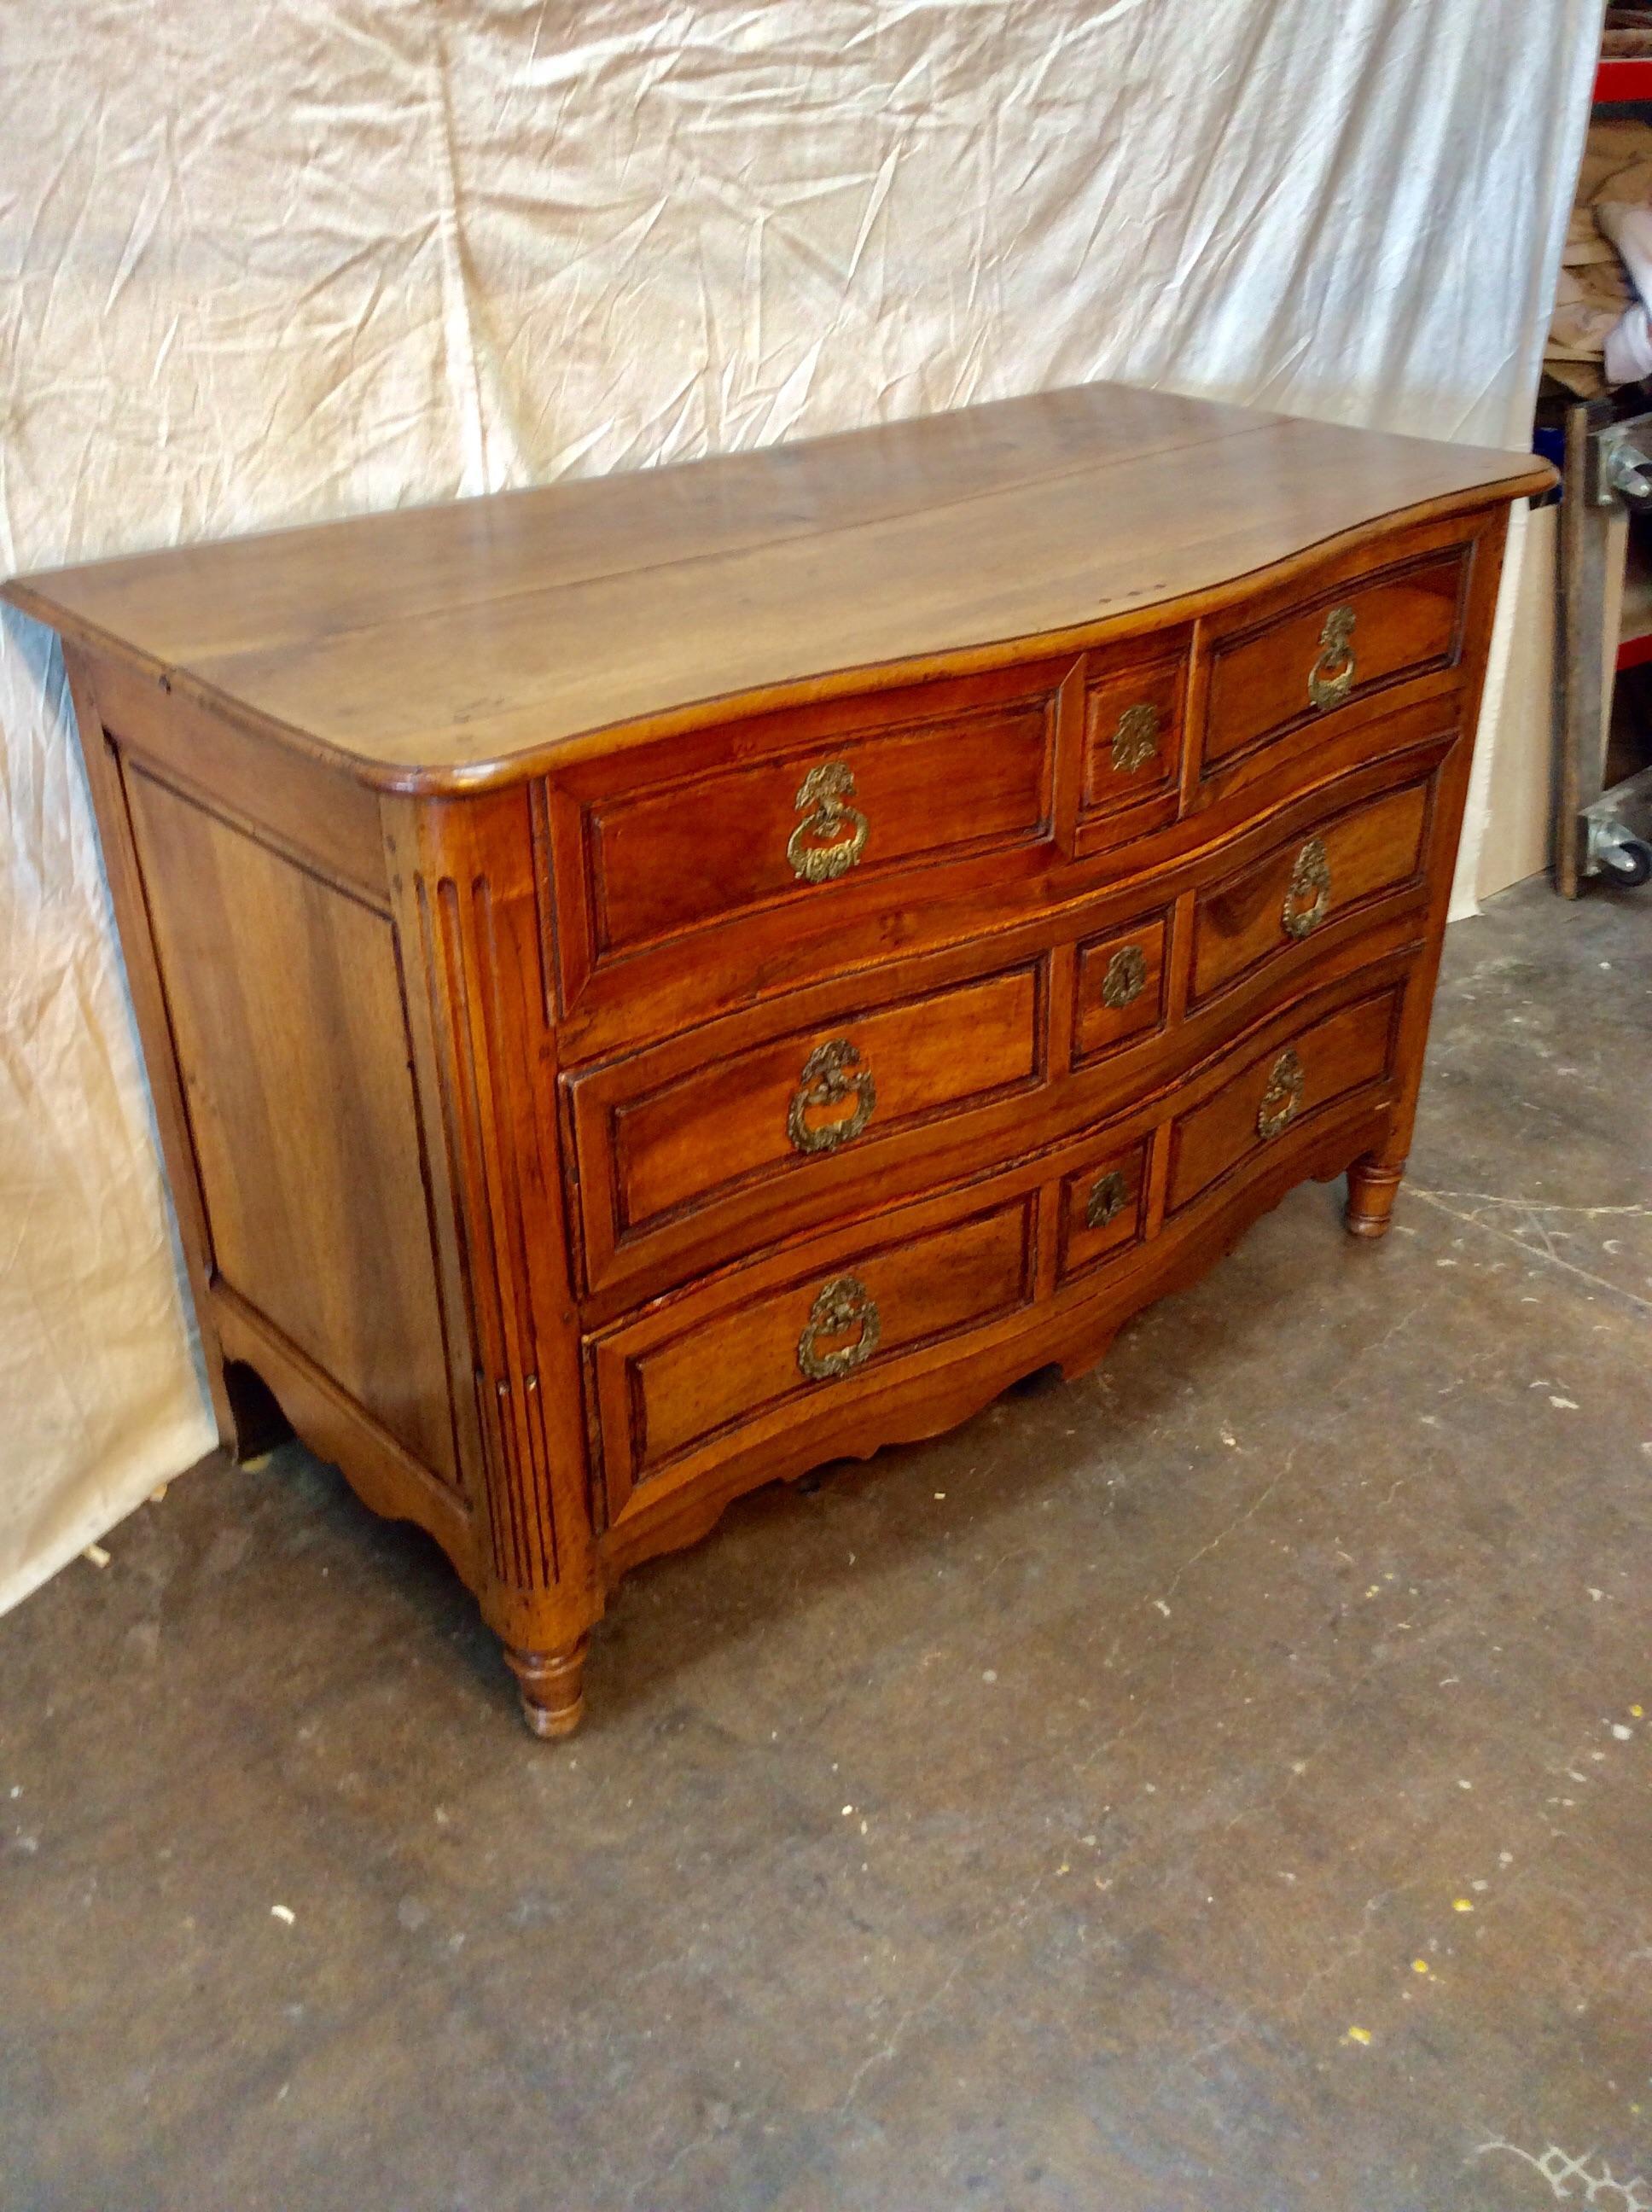 Found in the South of France, this 18th century French Chest of Drawers is constructed of solid walnut having a serpentine front with conforming top, drawers and apron rest on hand carved feet. Each of the four drawers with dovetail joinery feature